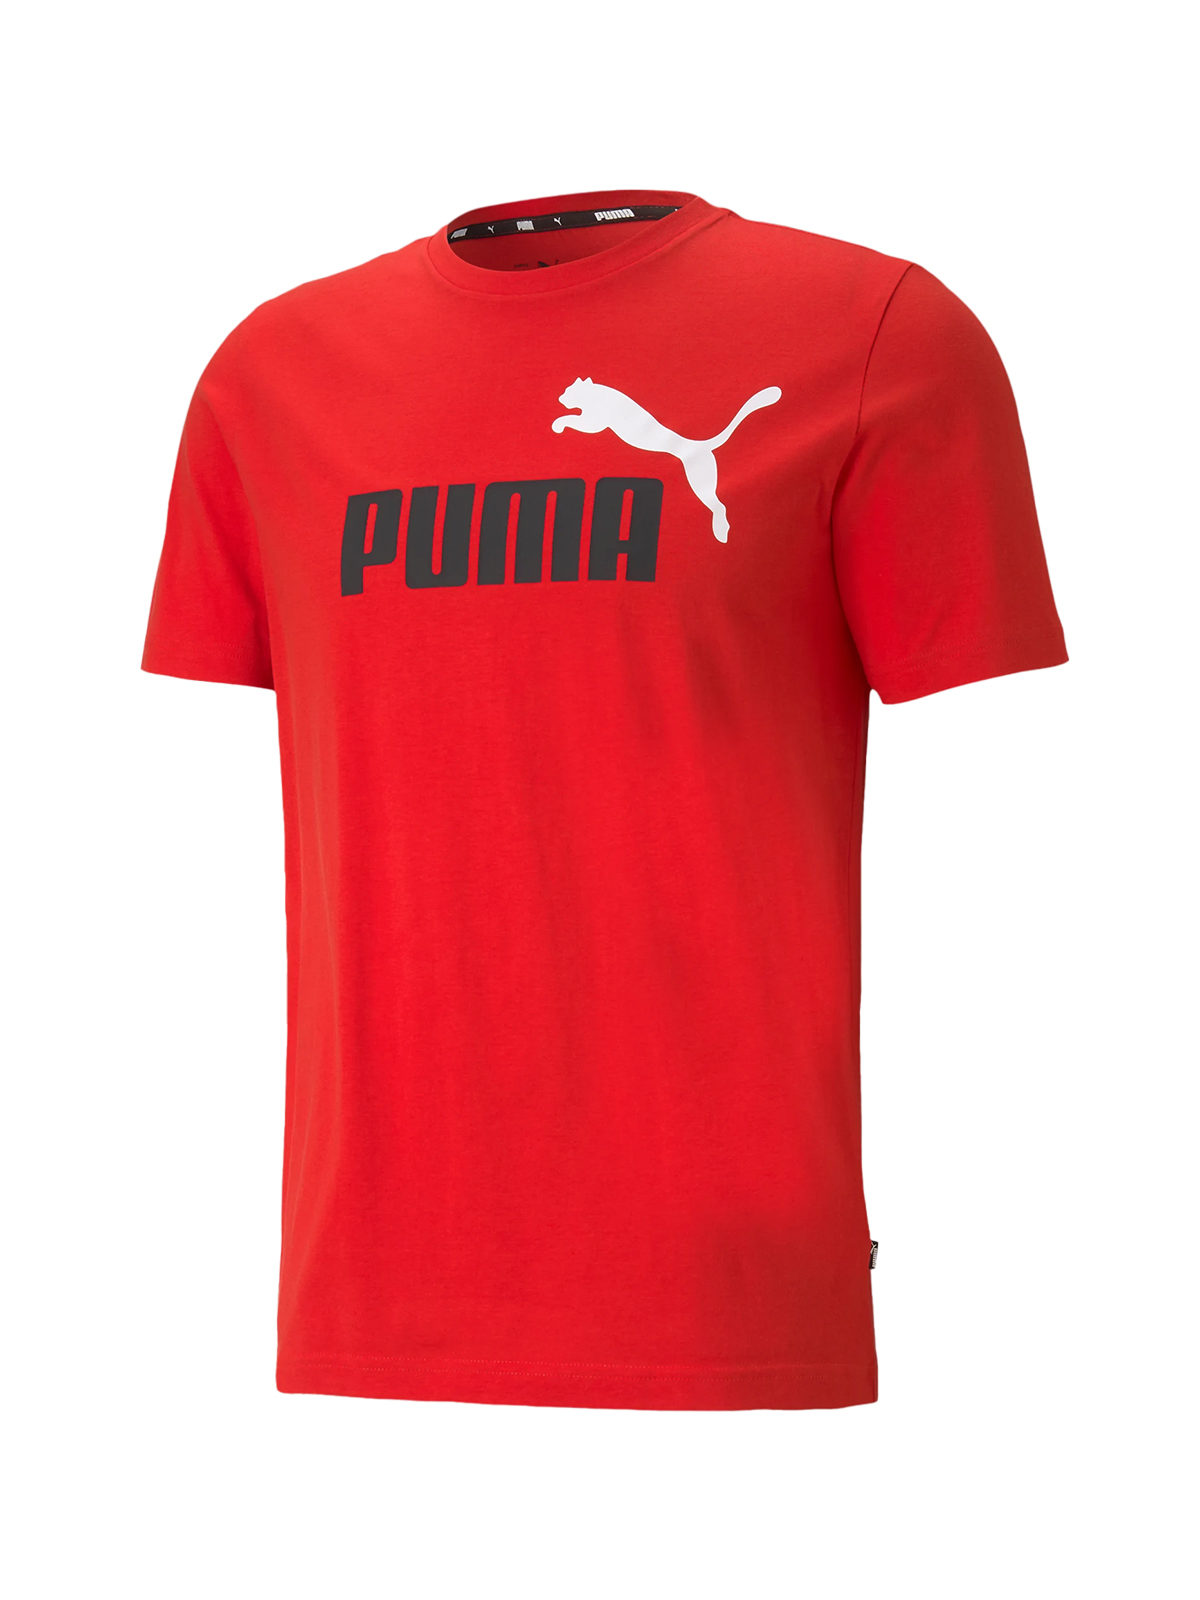 Puma ESS + at for 20.69€ short on COL 2 sleeve T-shirt: sale LOGO TEE Men\'s